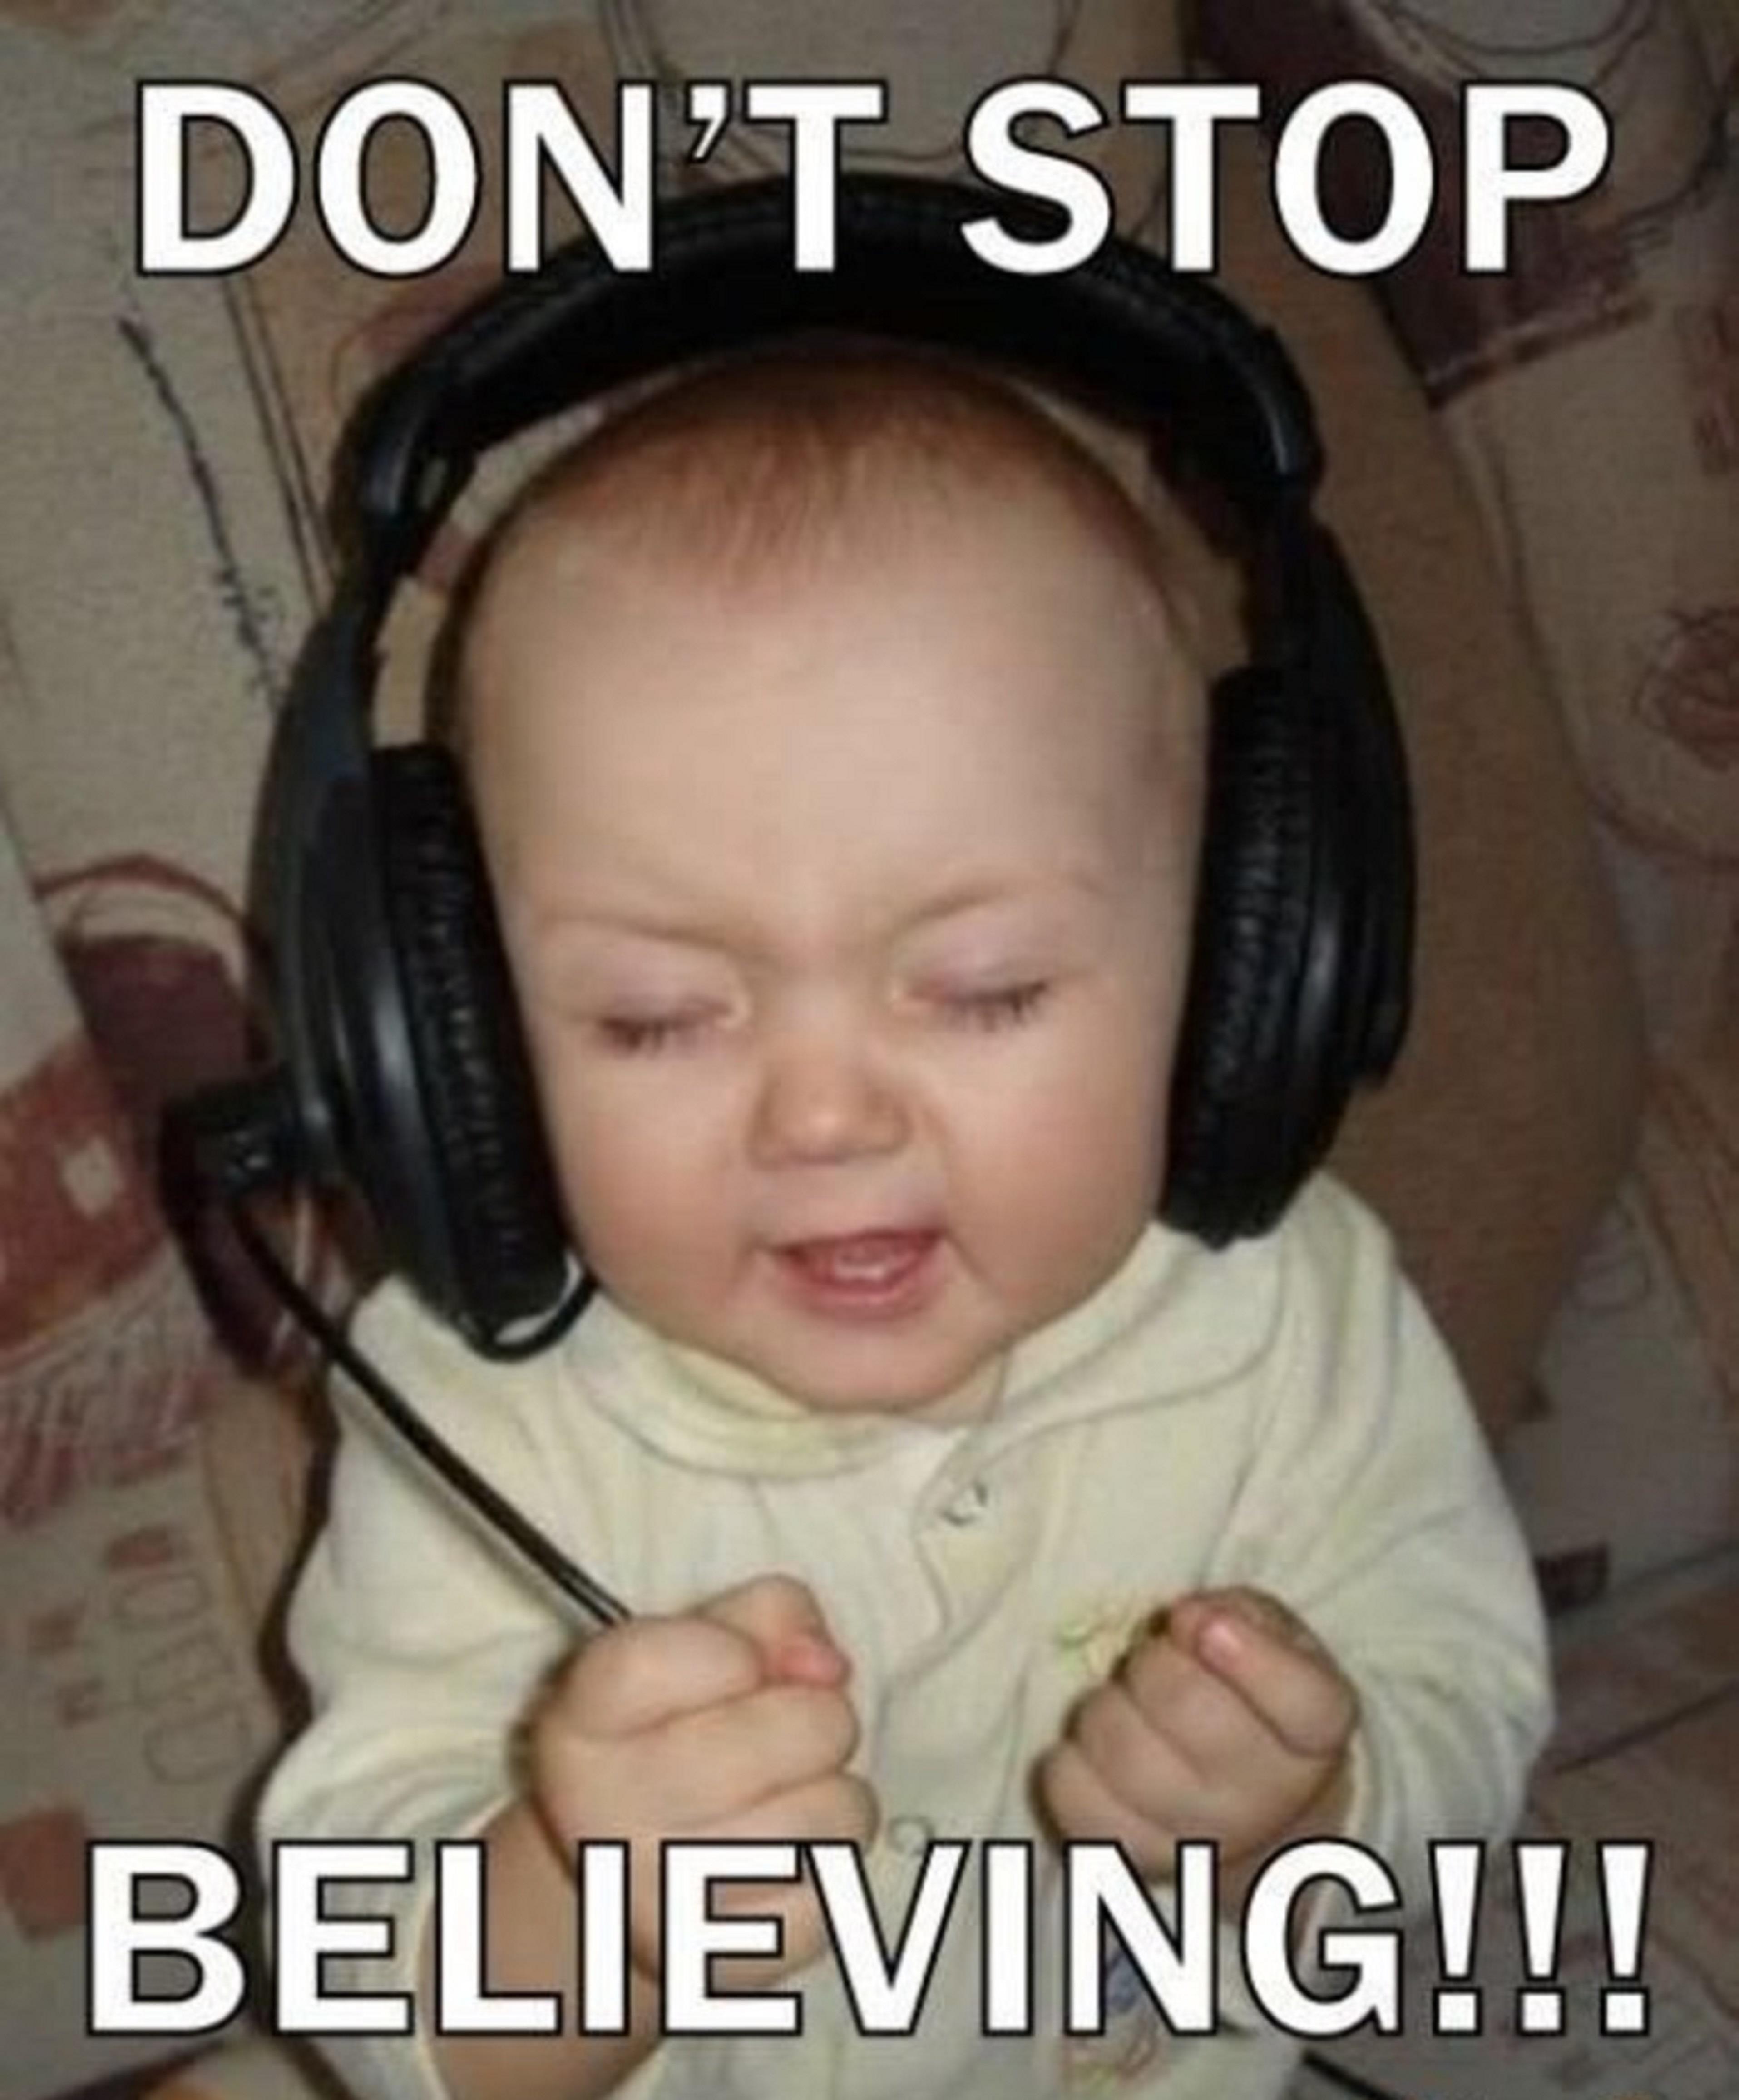 Don’t Stop Funny Baby Listening Music Image